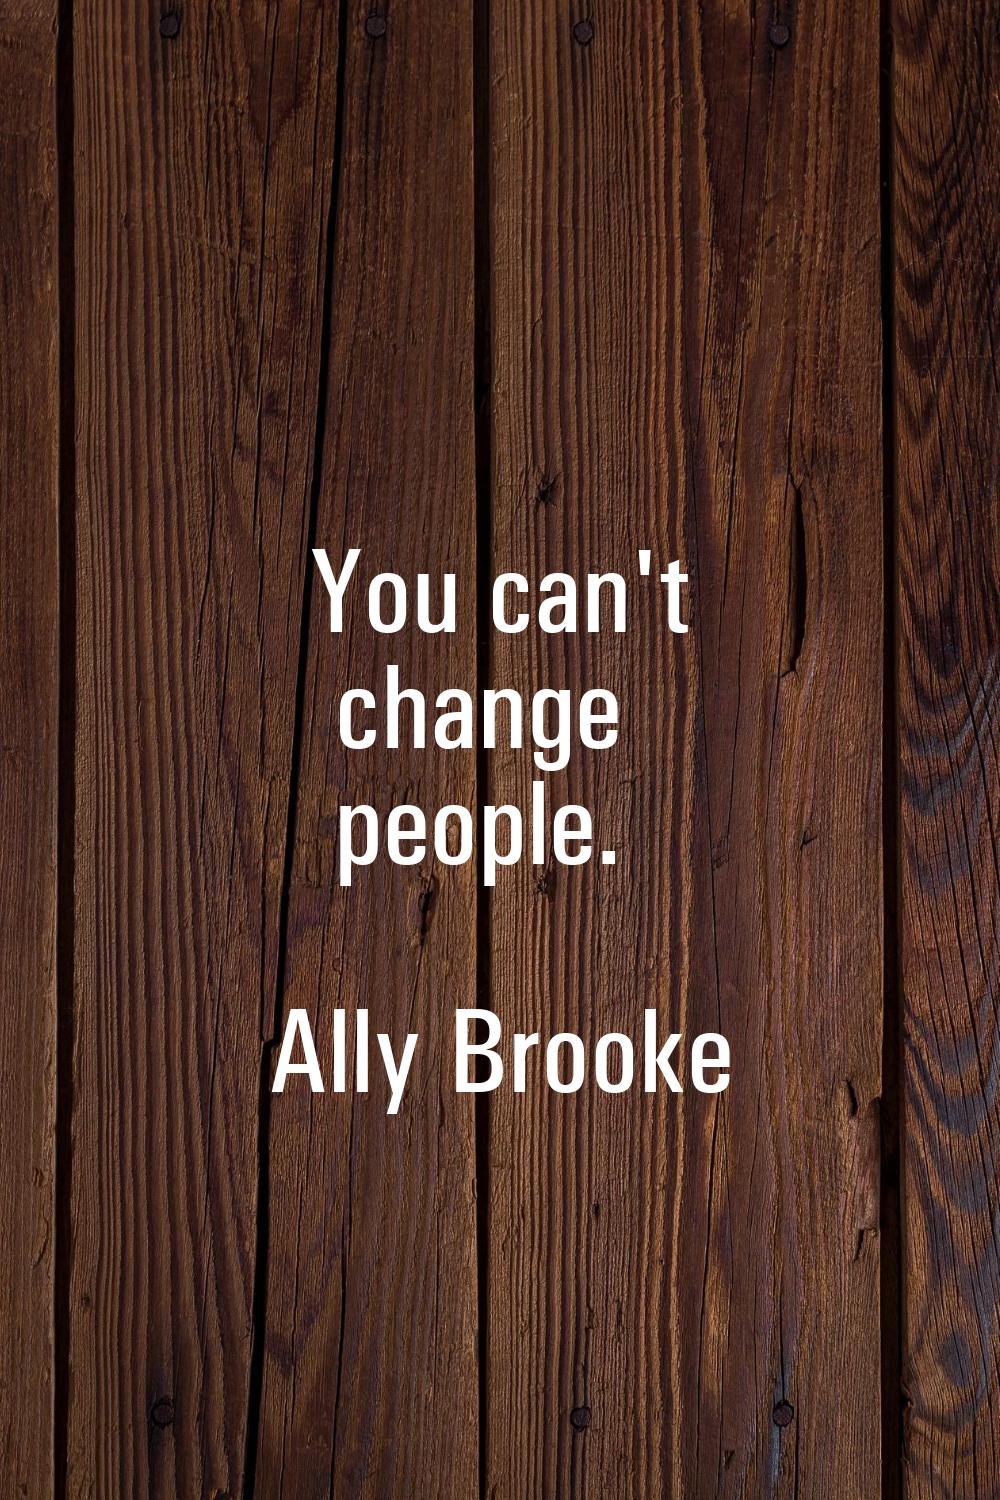 You can't change people.